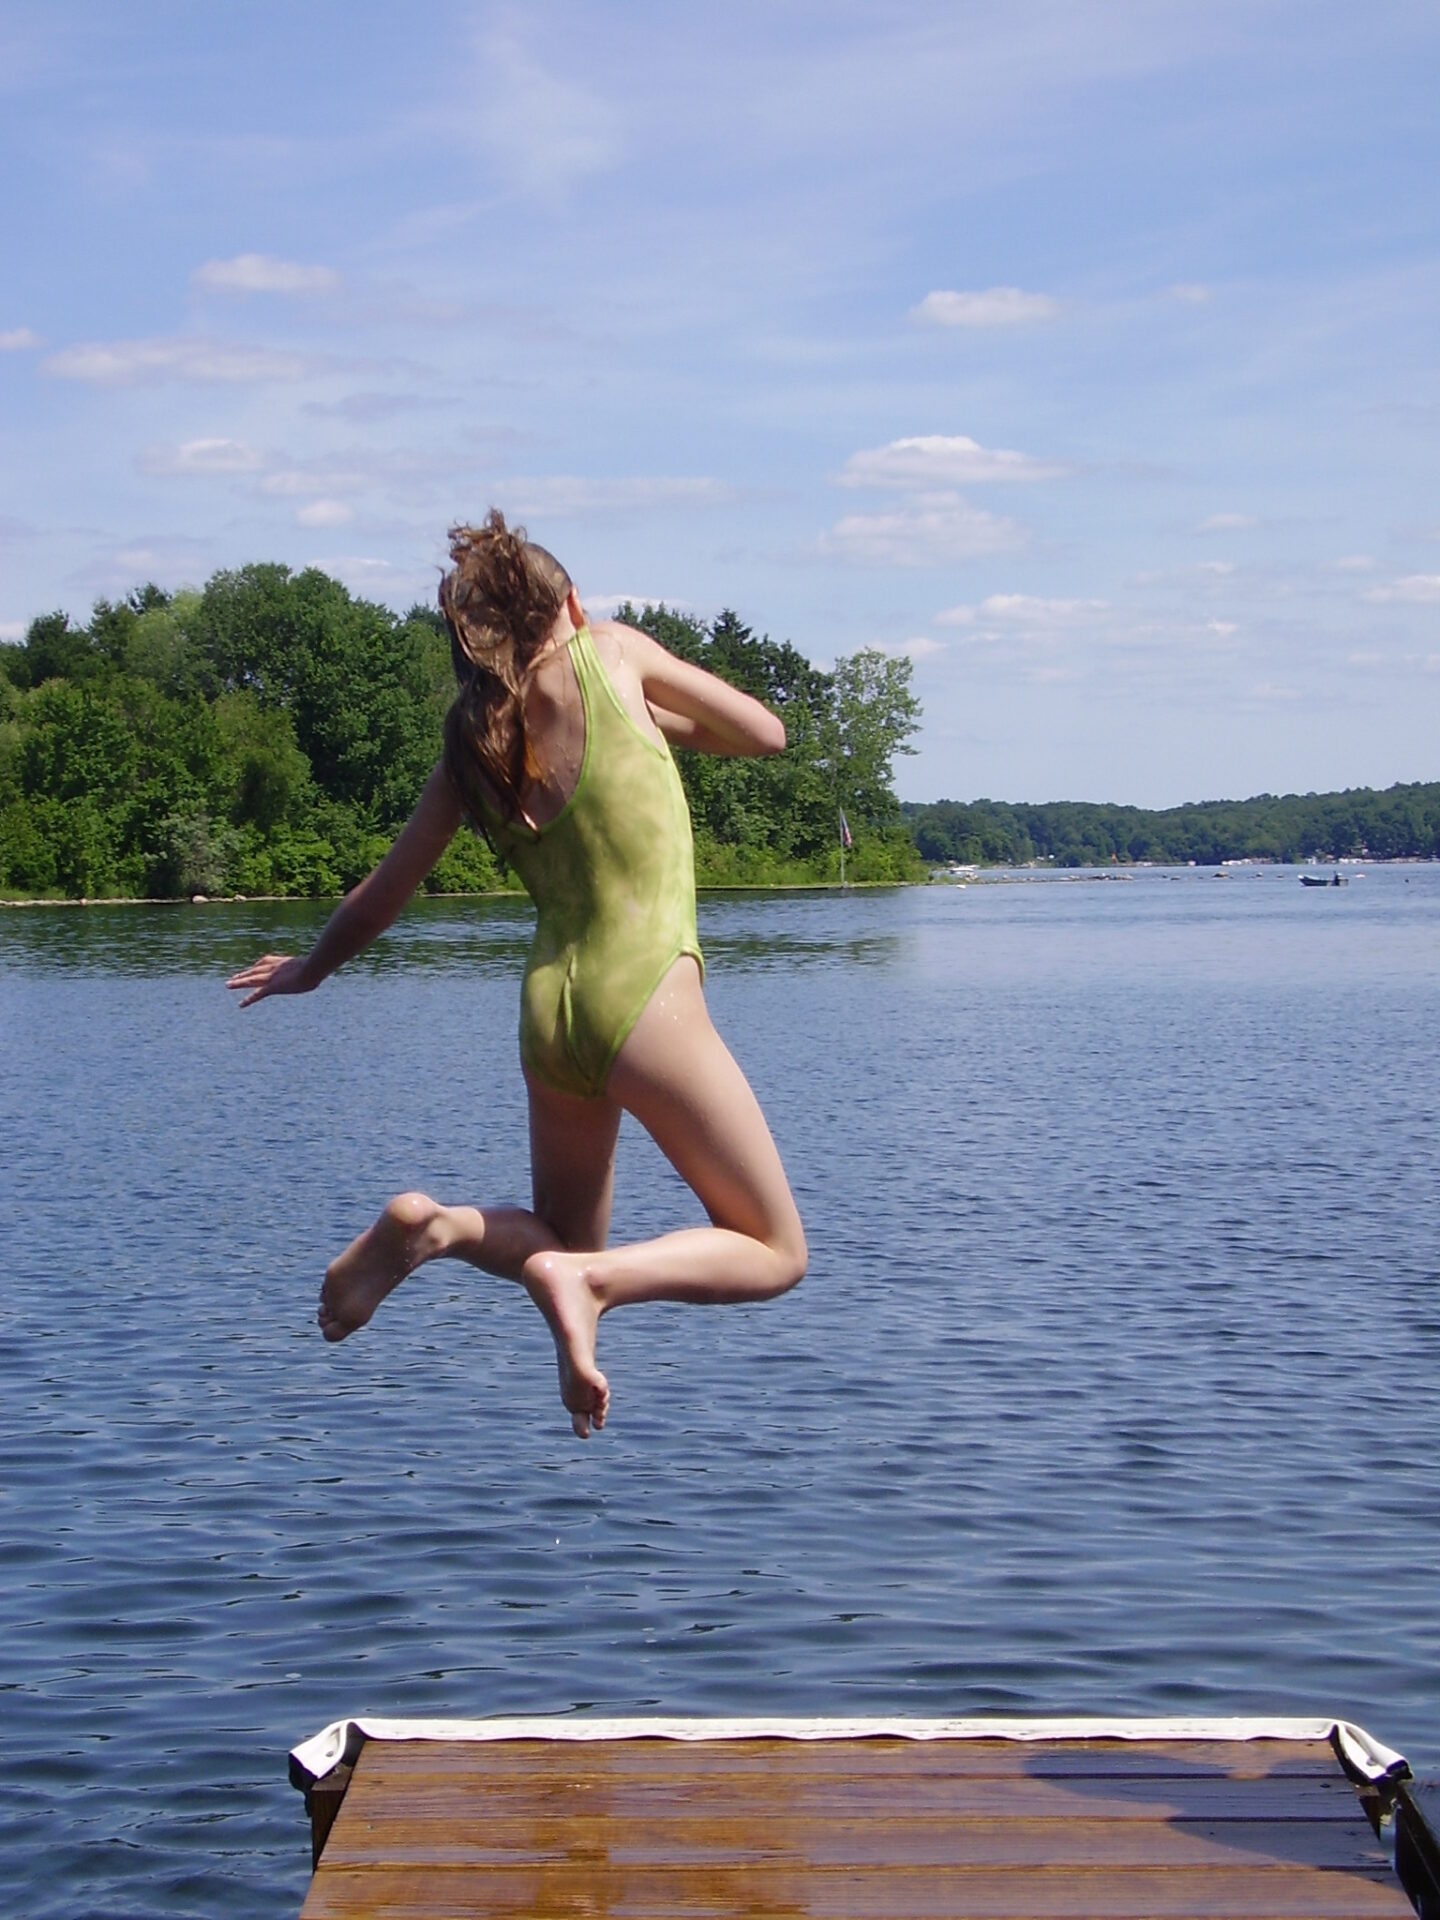 image of girl jumping in a Connecticut lake.